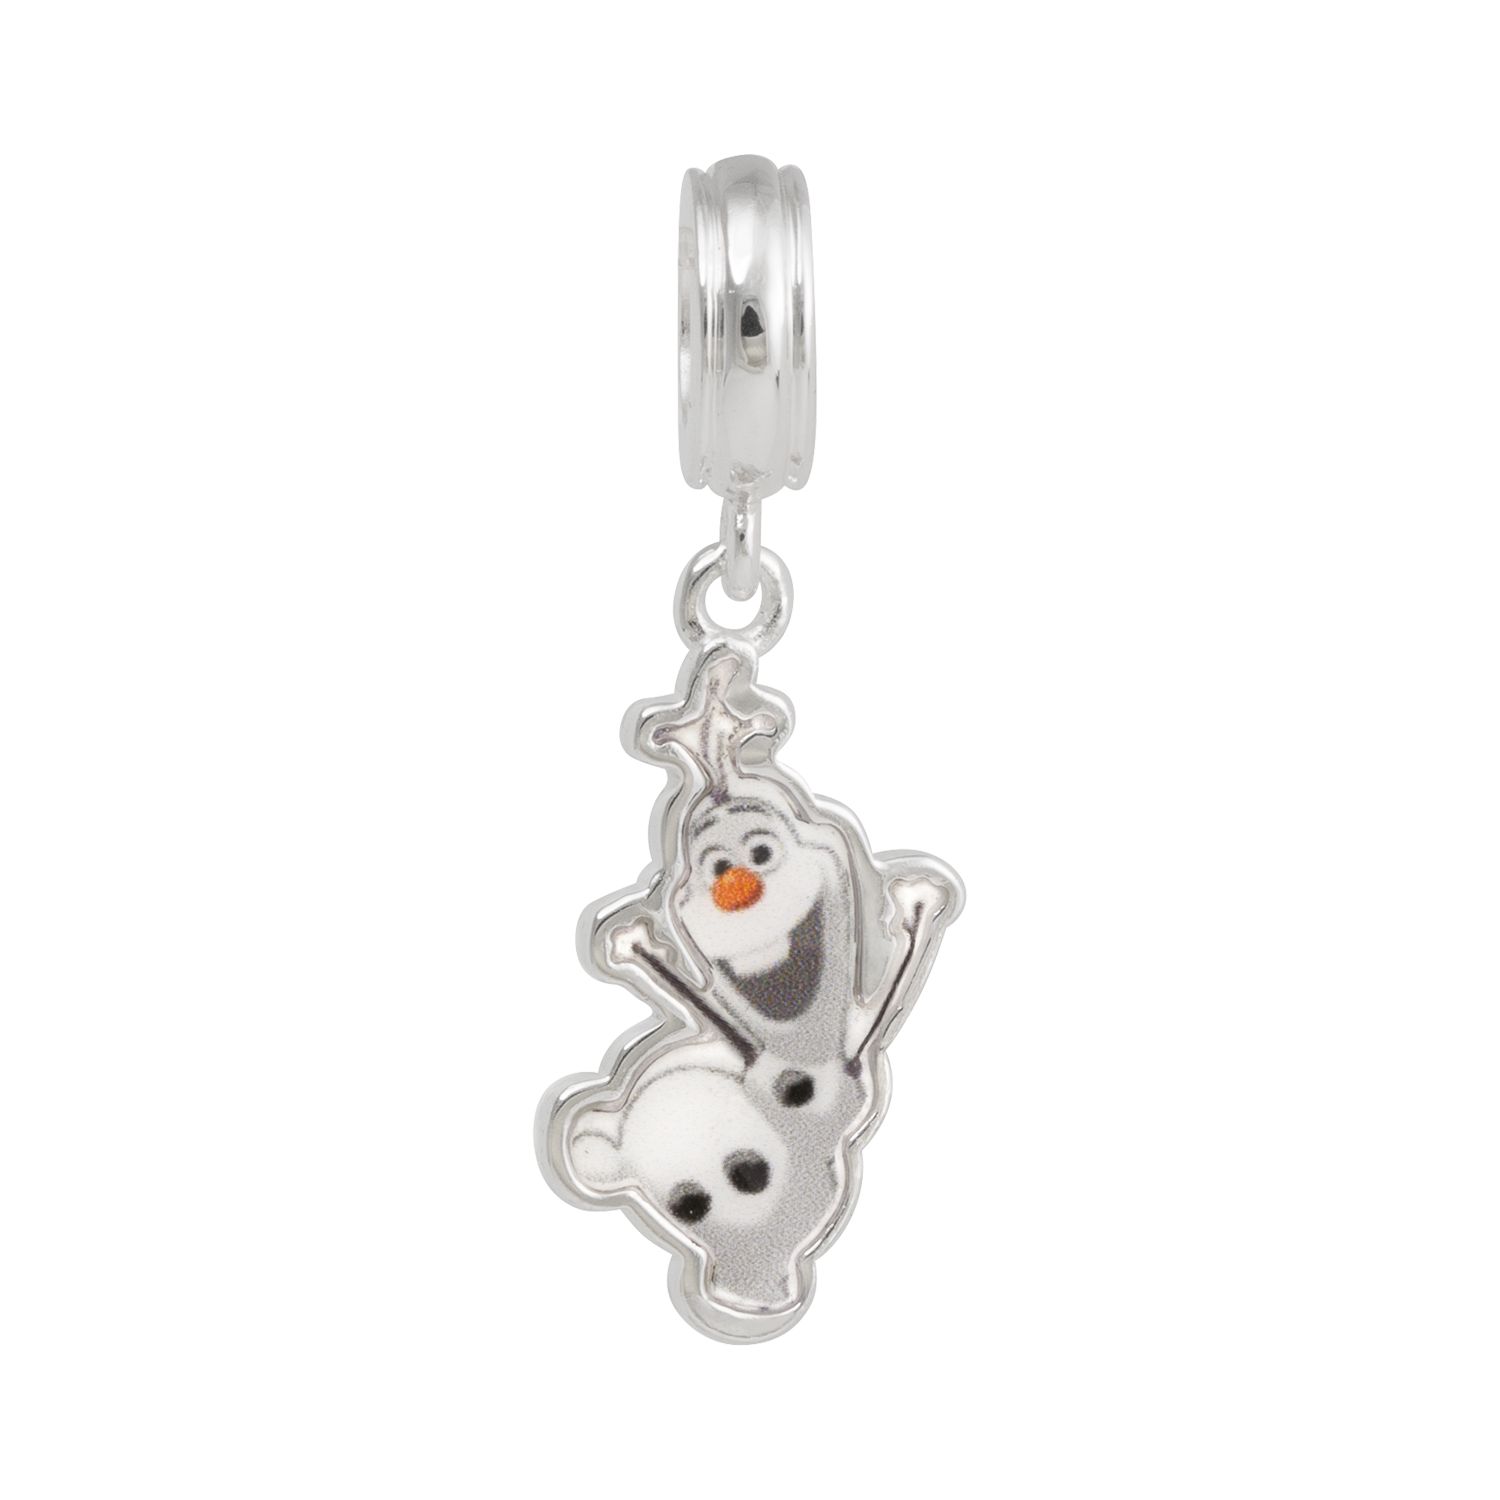 Image for Disney Frozen Sterling Silver Olaf Charm at Kohl's.